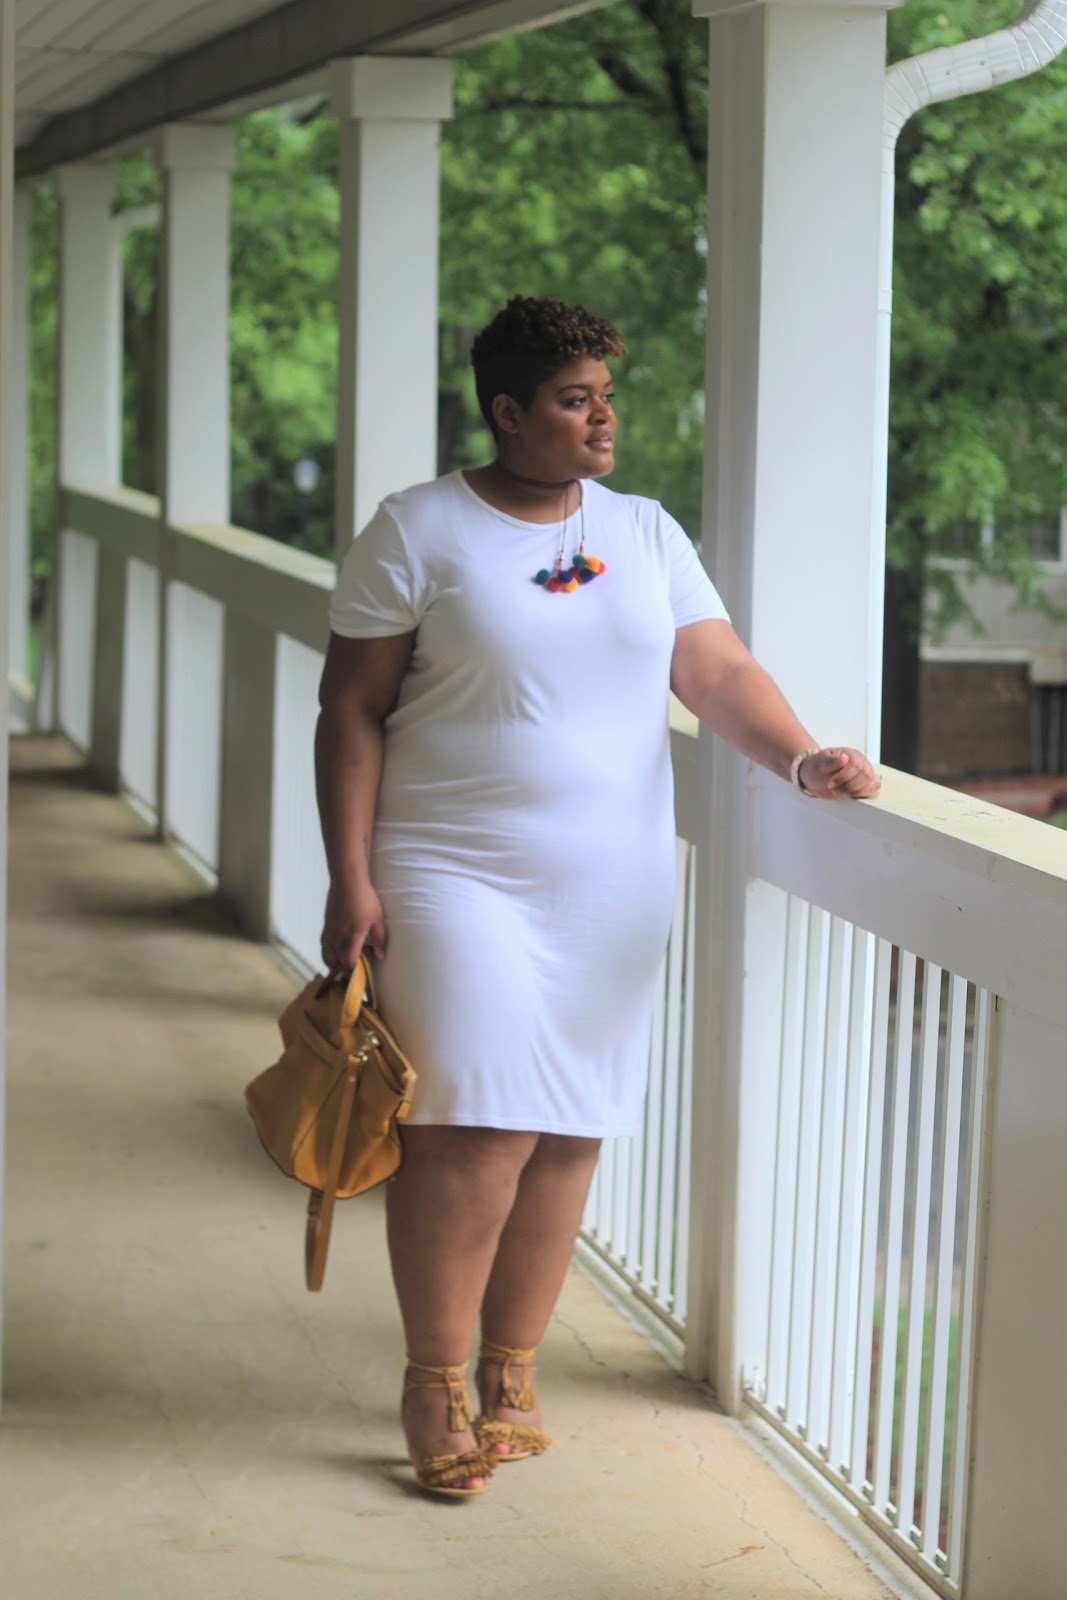 Smoothing and Twirling into Spring with Kohl's Shapewear